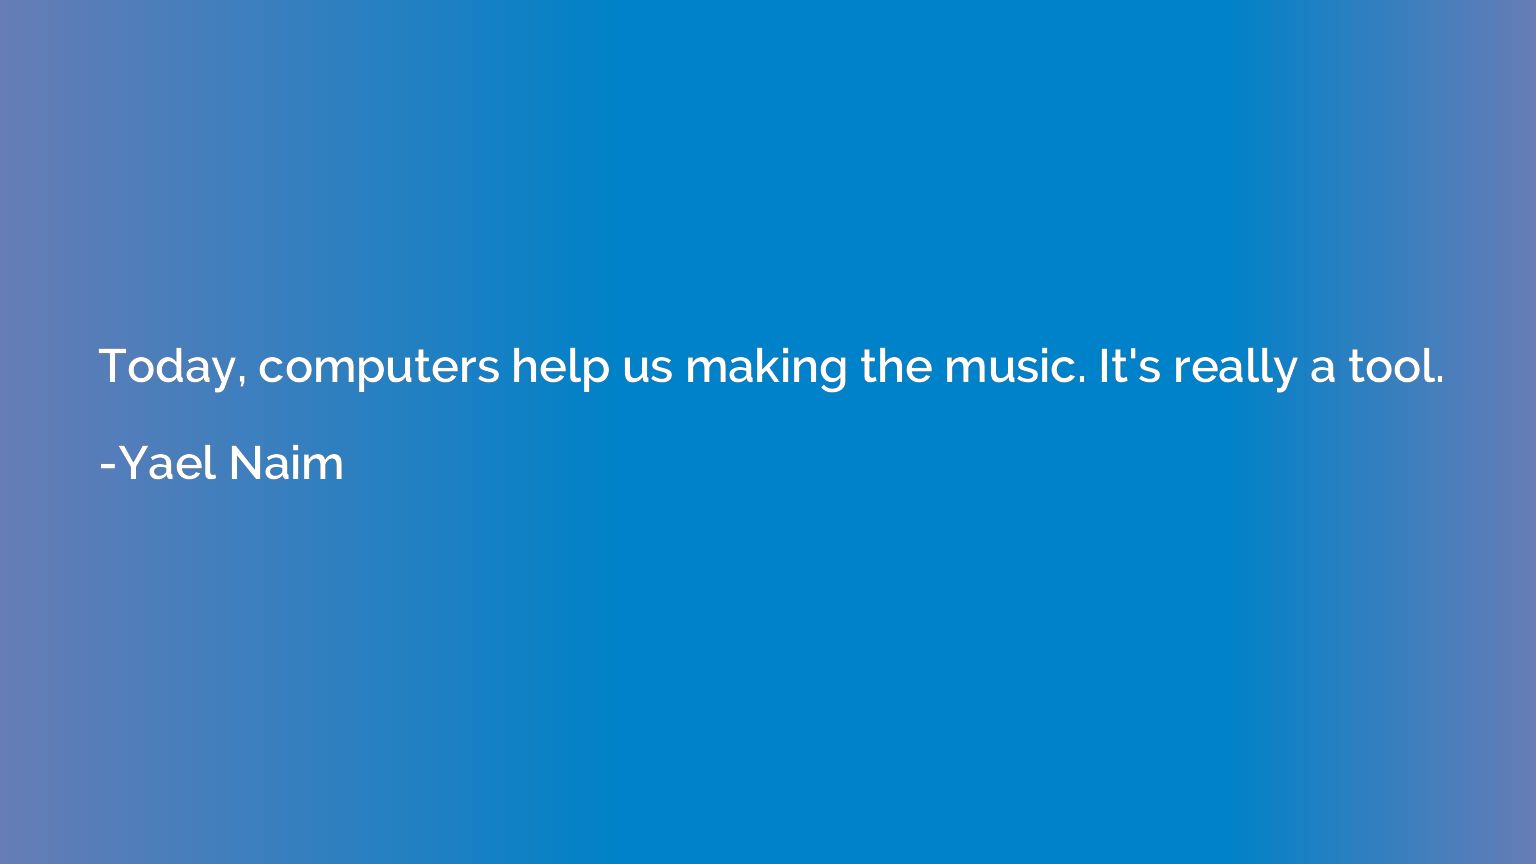 Today, computers help us making the music. It's really a too